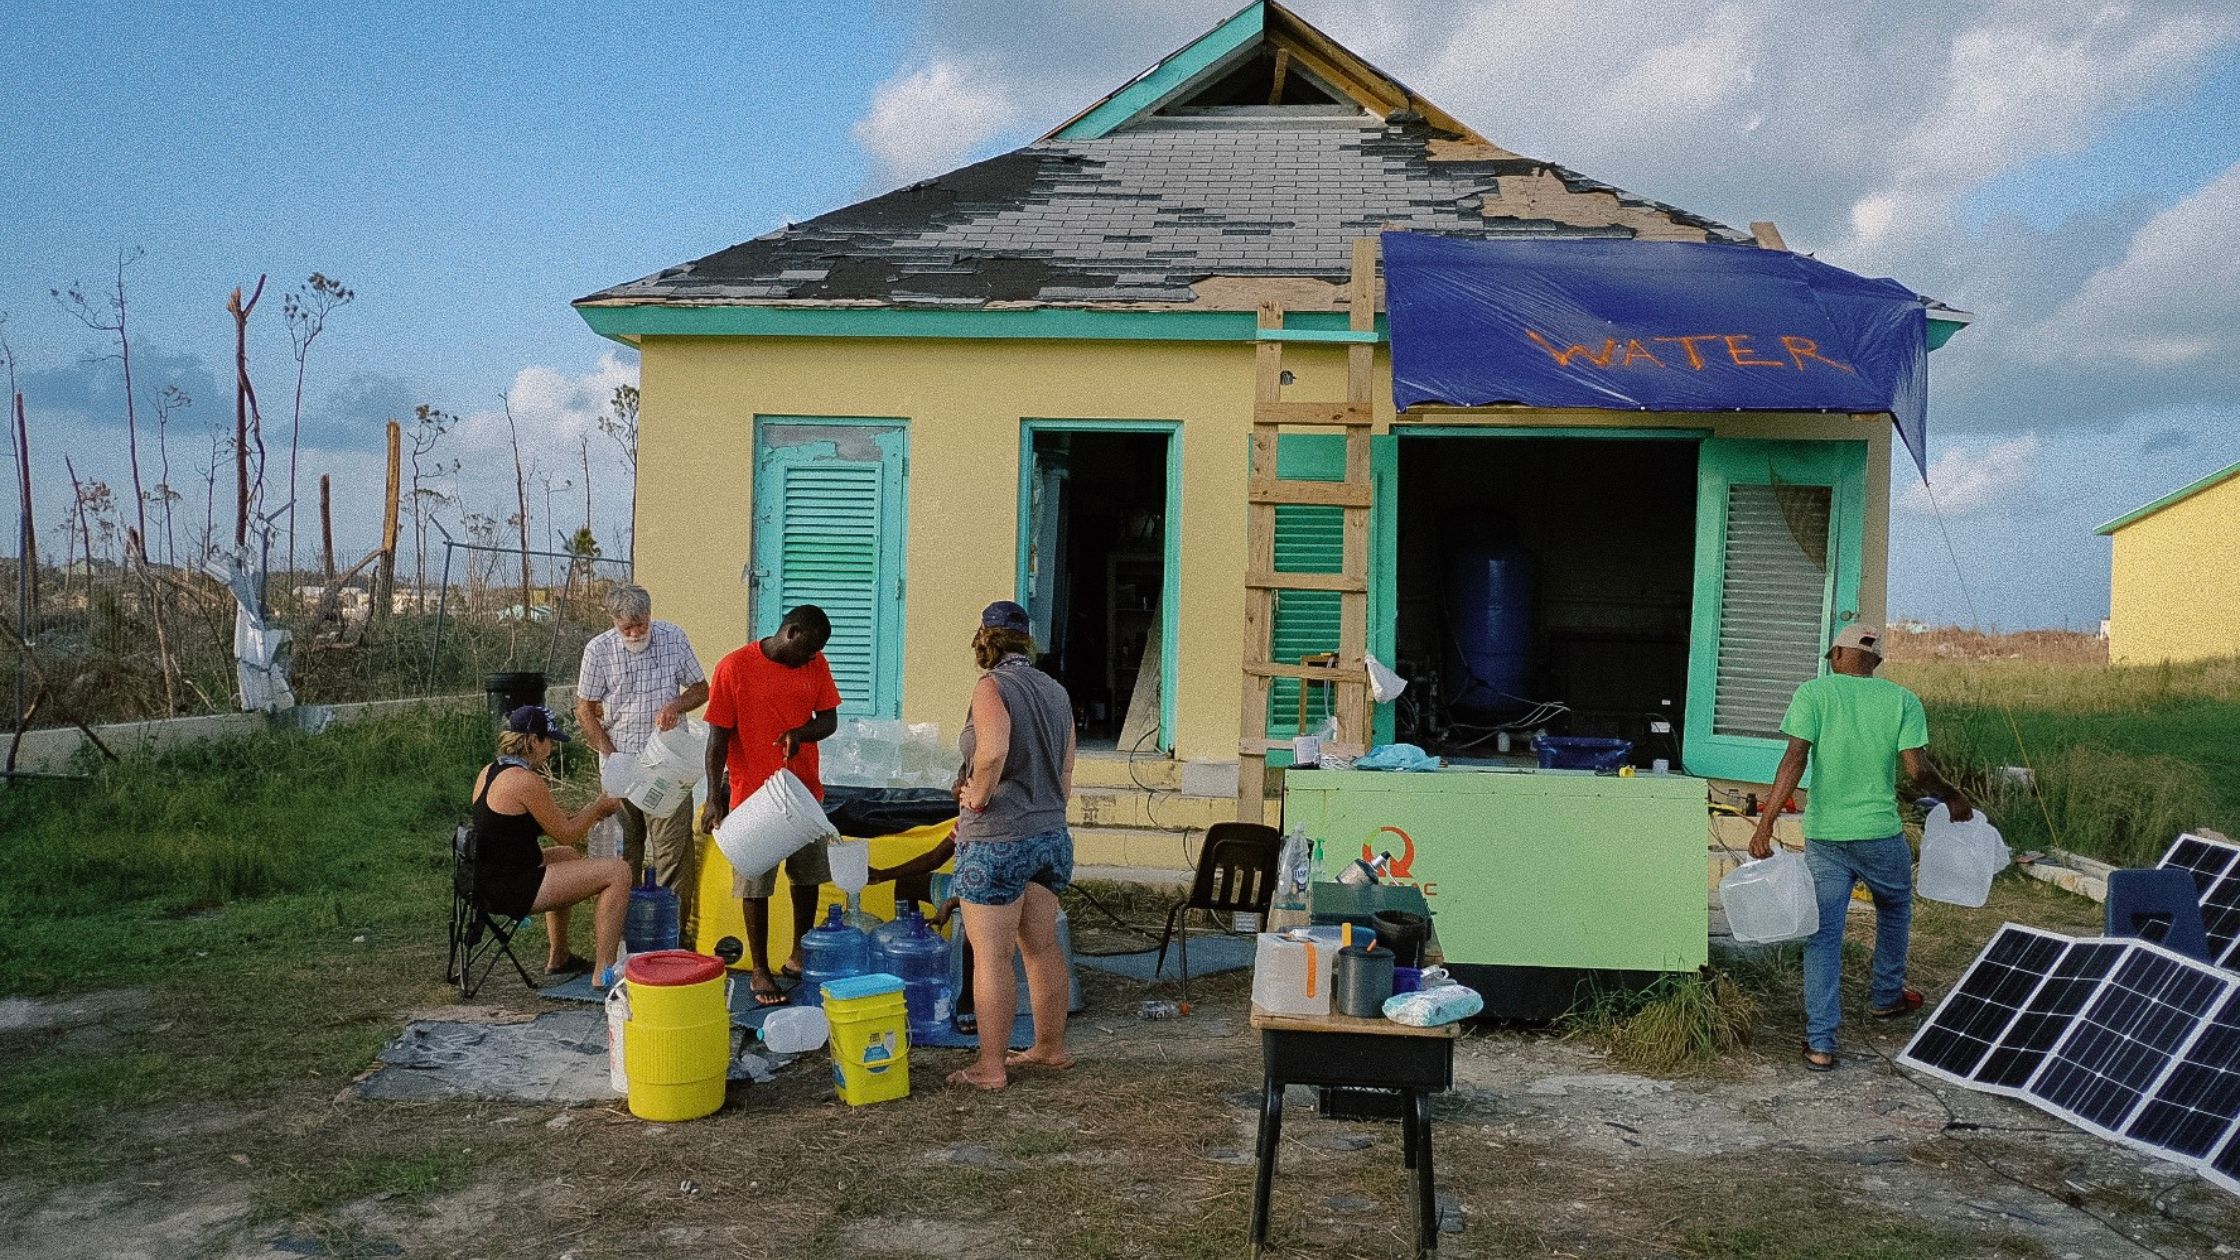 Volunteers making and distributing clean water in the Bahamas after Hurricane Dorian